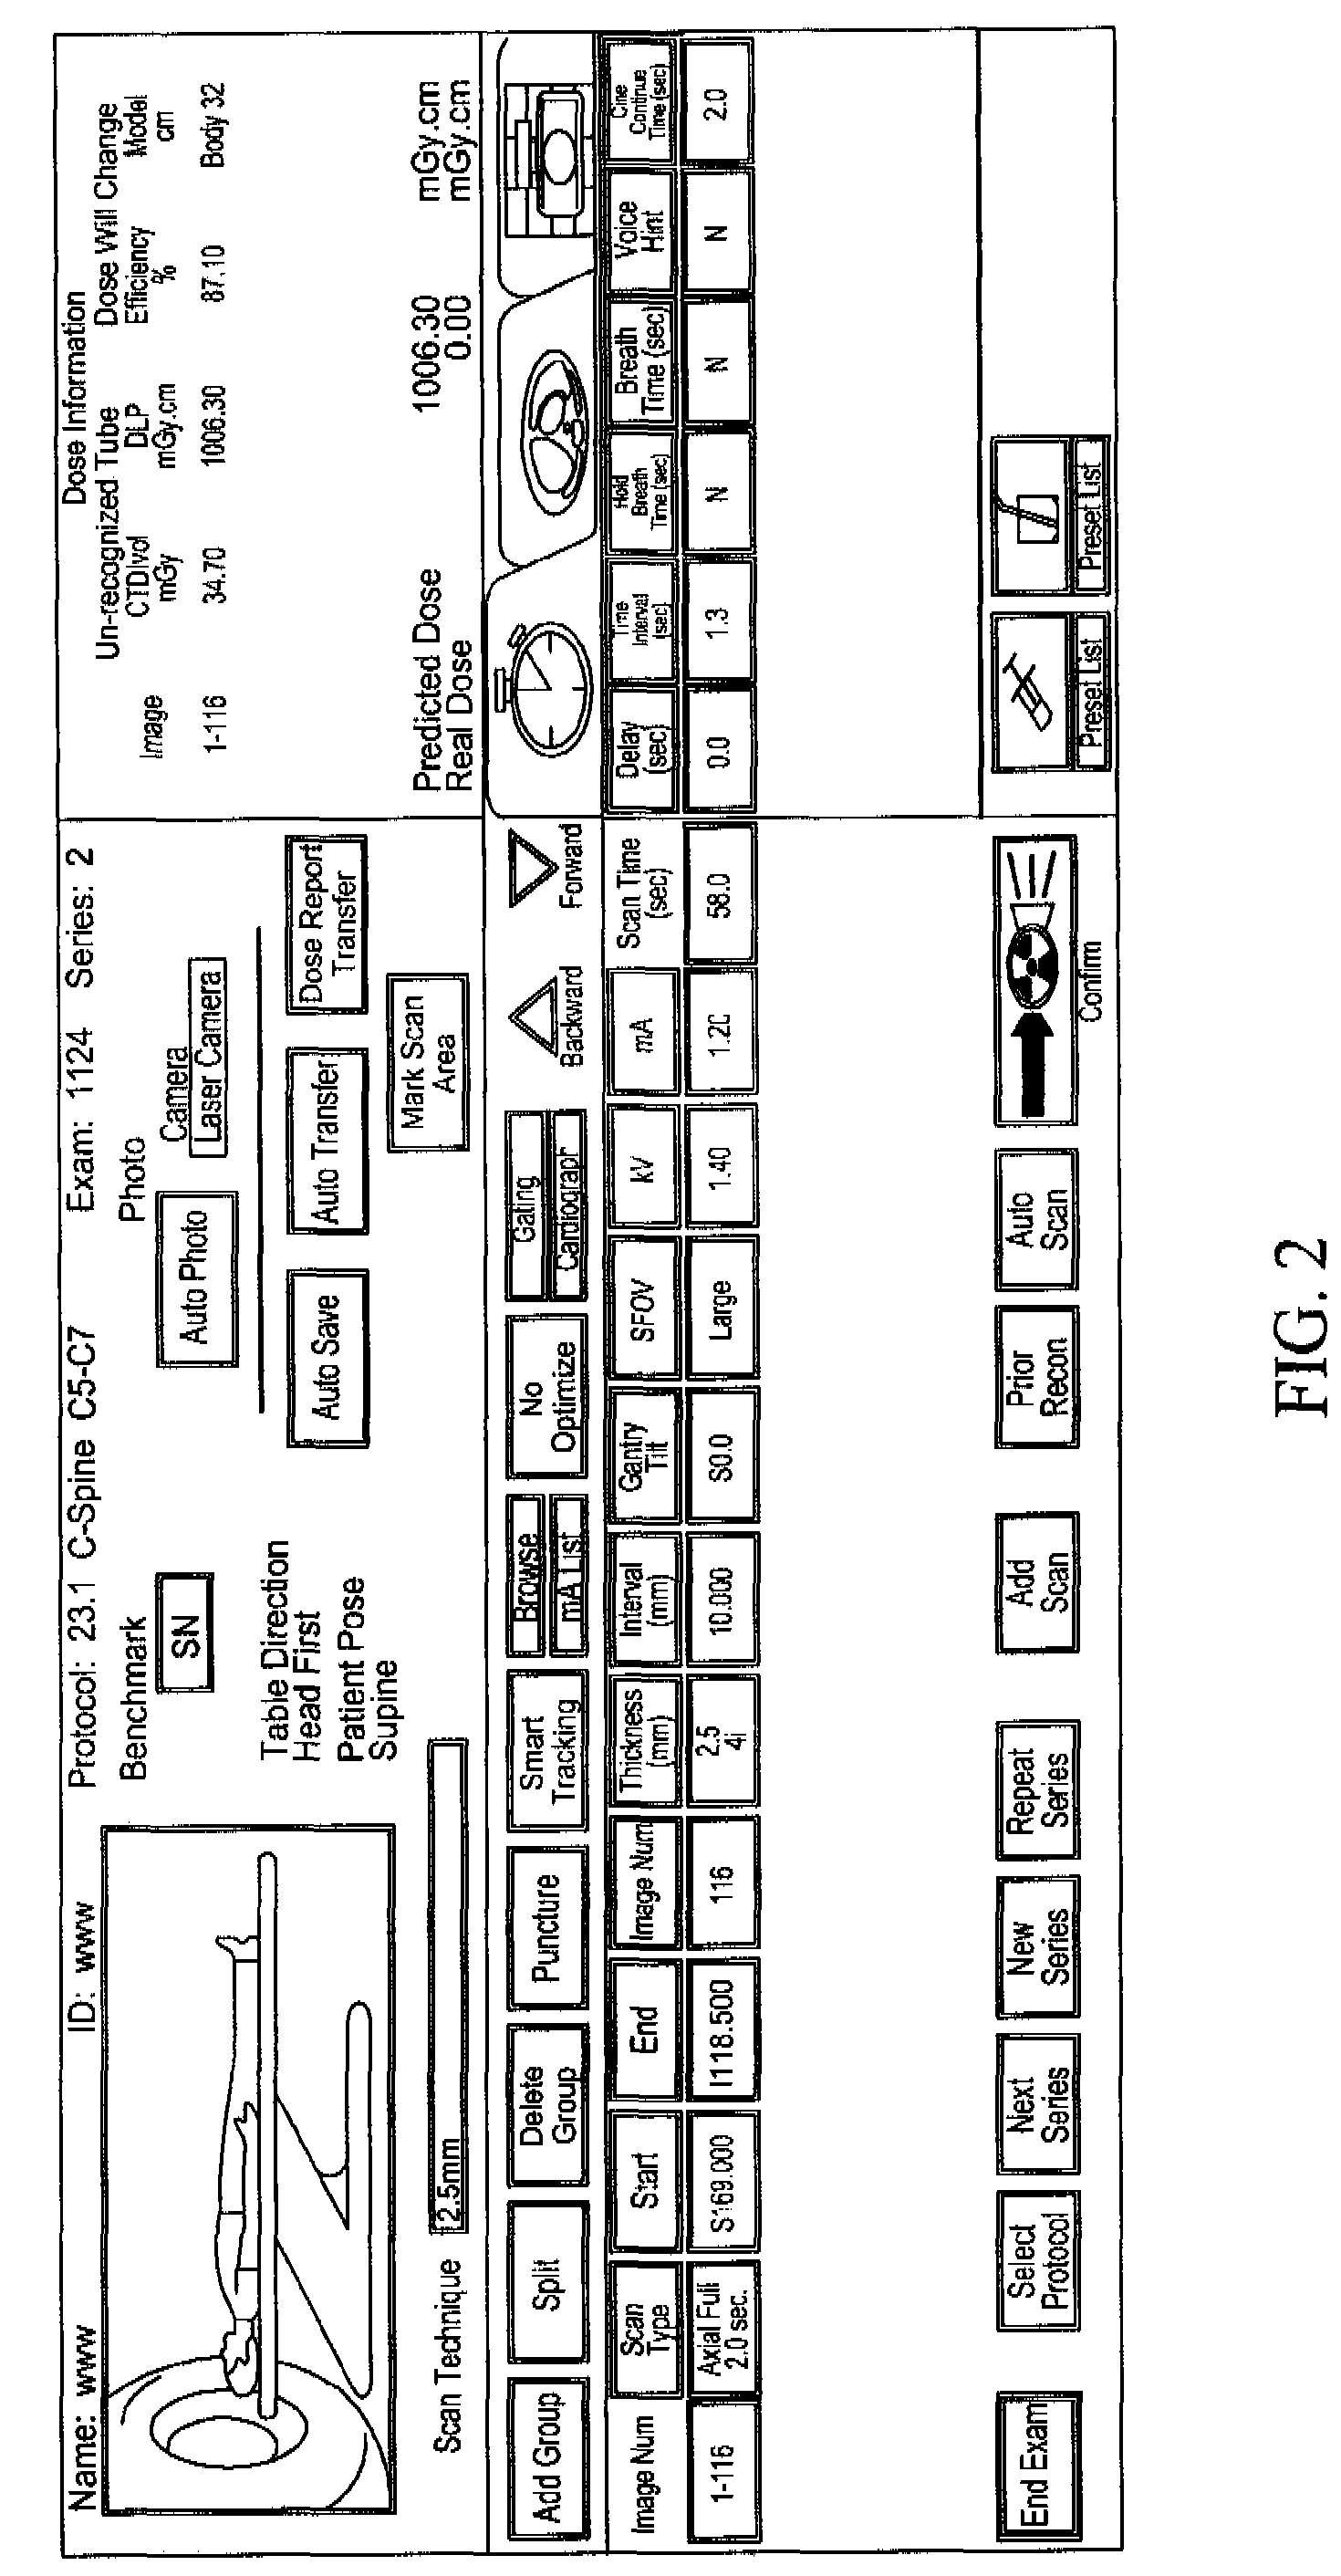 Scanning detection device of an X-ray CT apparatus, an X-ray CT system, and method of operation of the same